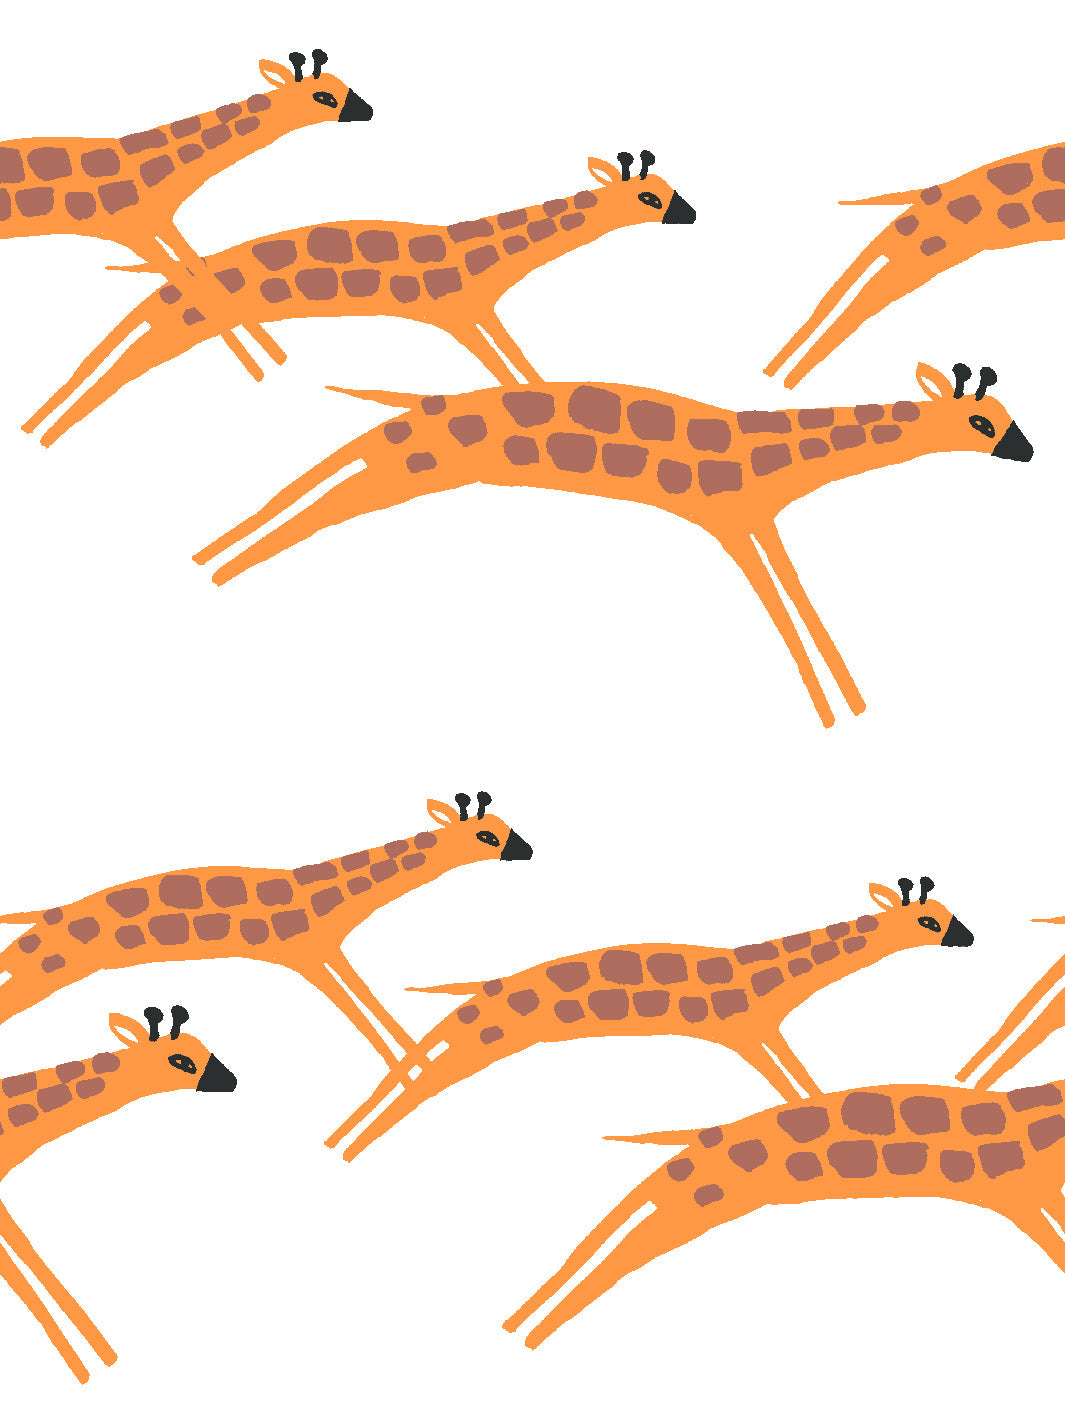 'Galloping Giraffes' Wallpaper by Tea Collection - White